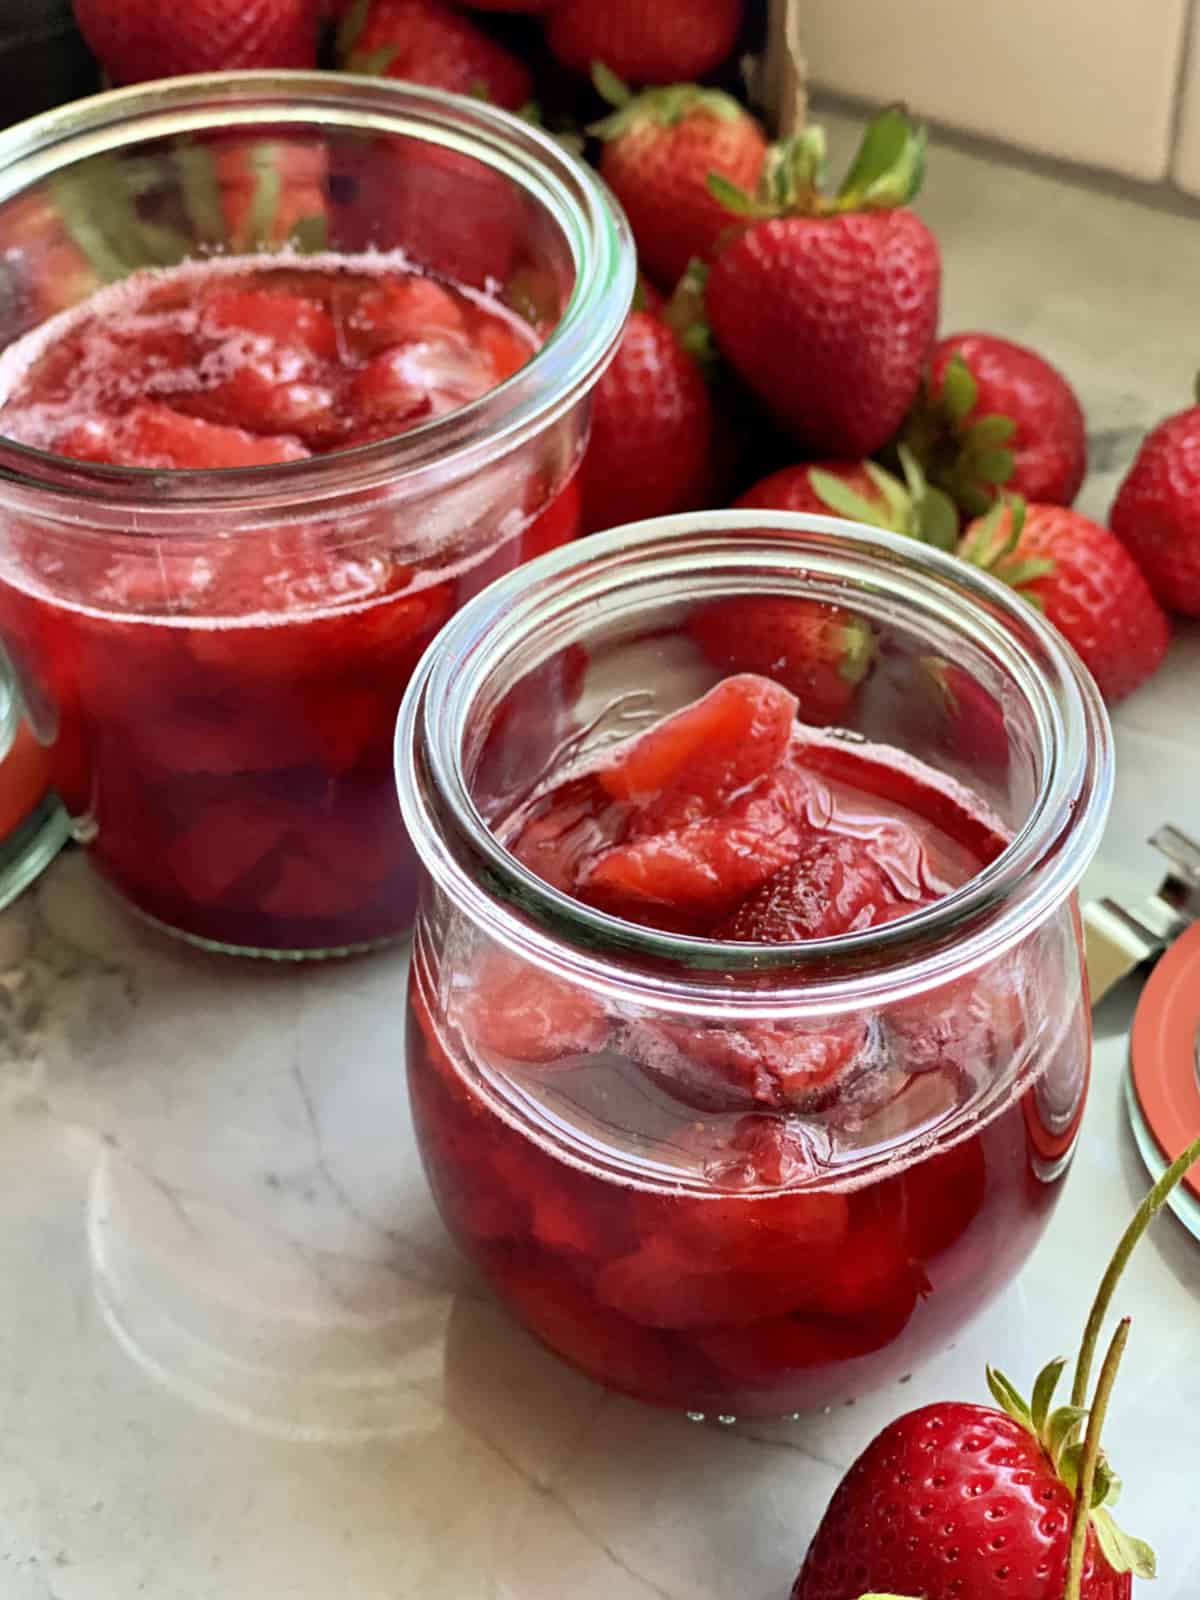 Close up of two glass jars filled with strawberry sauce.